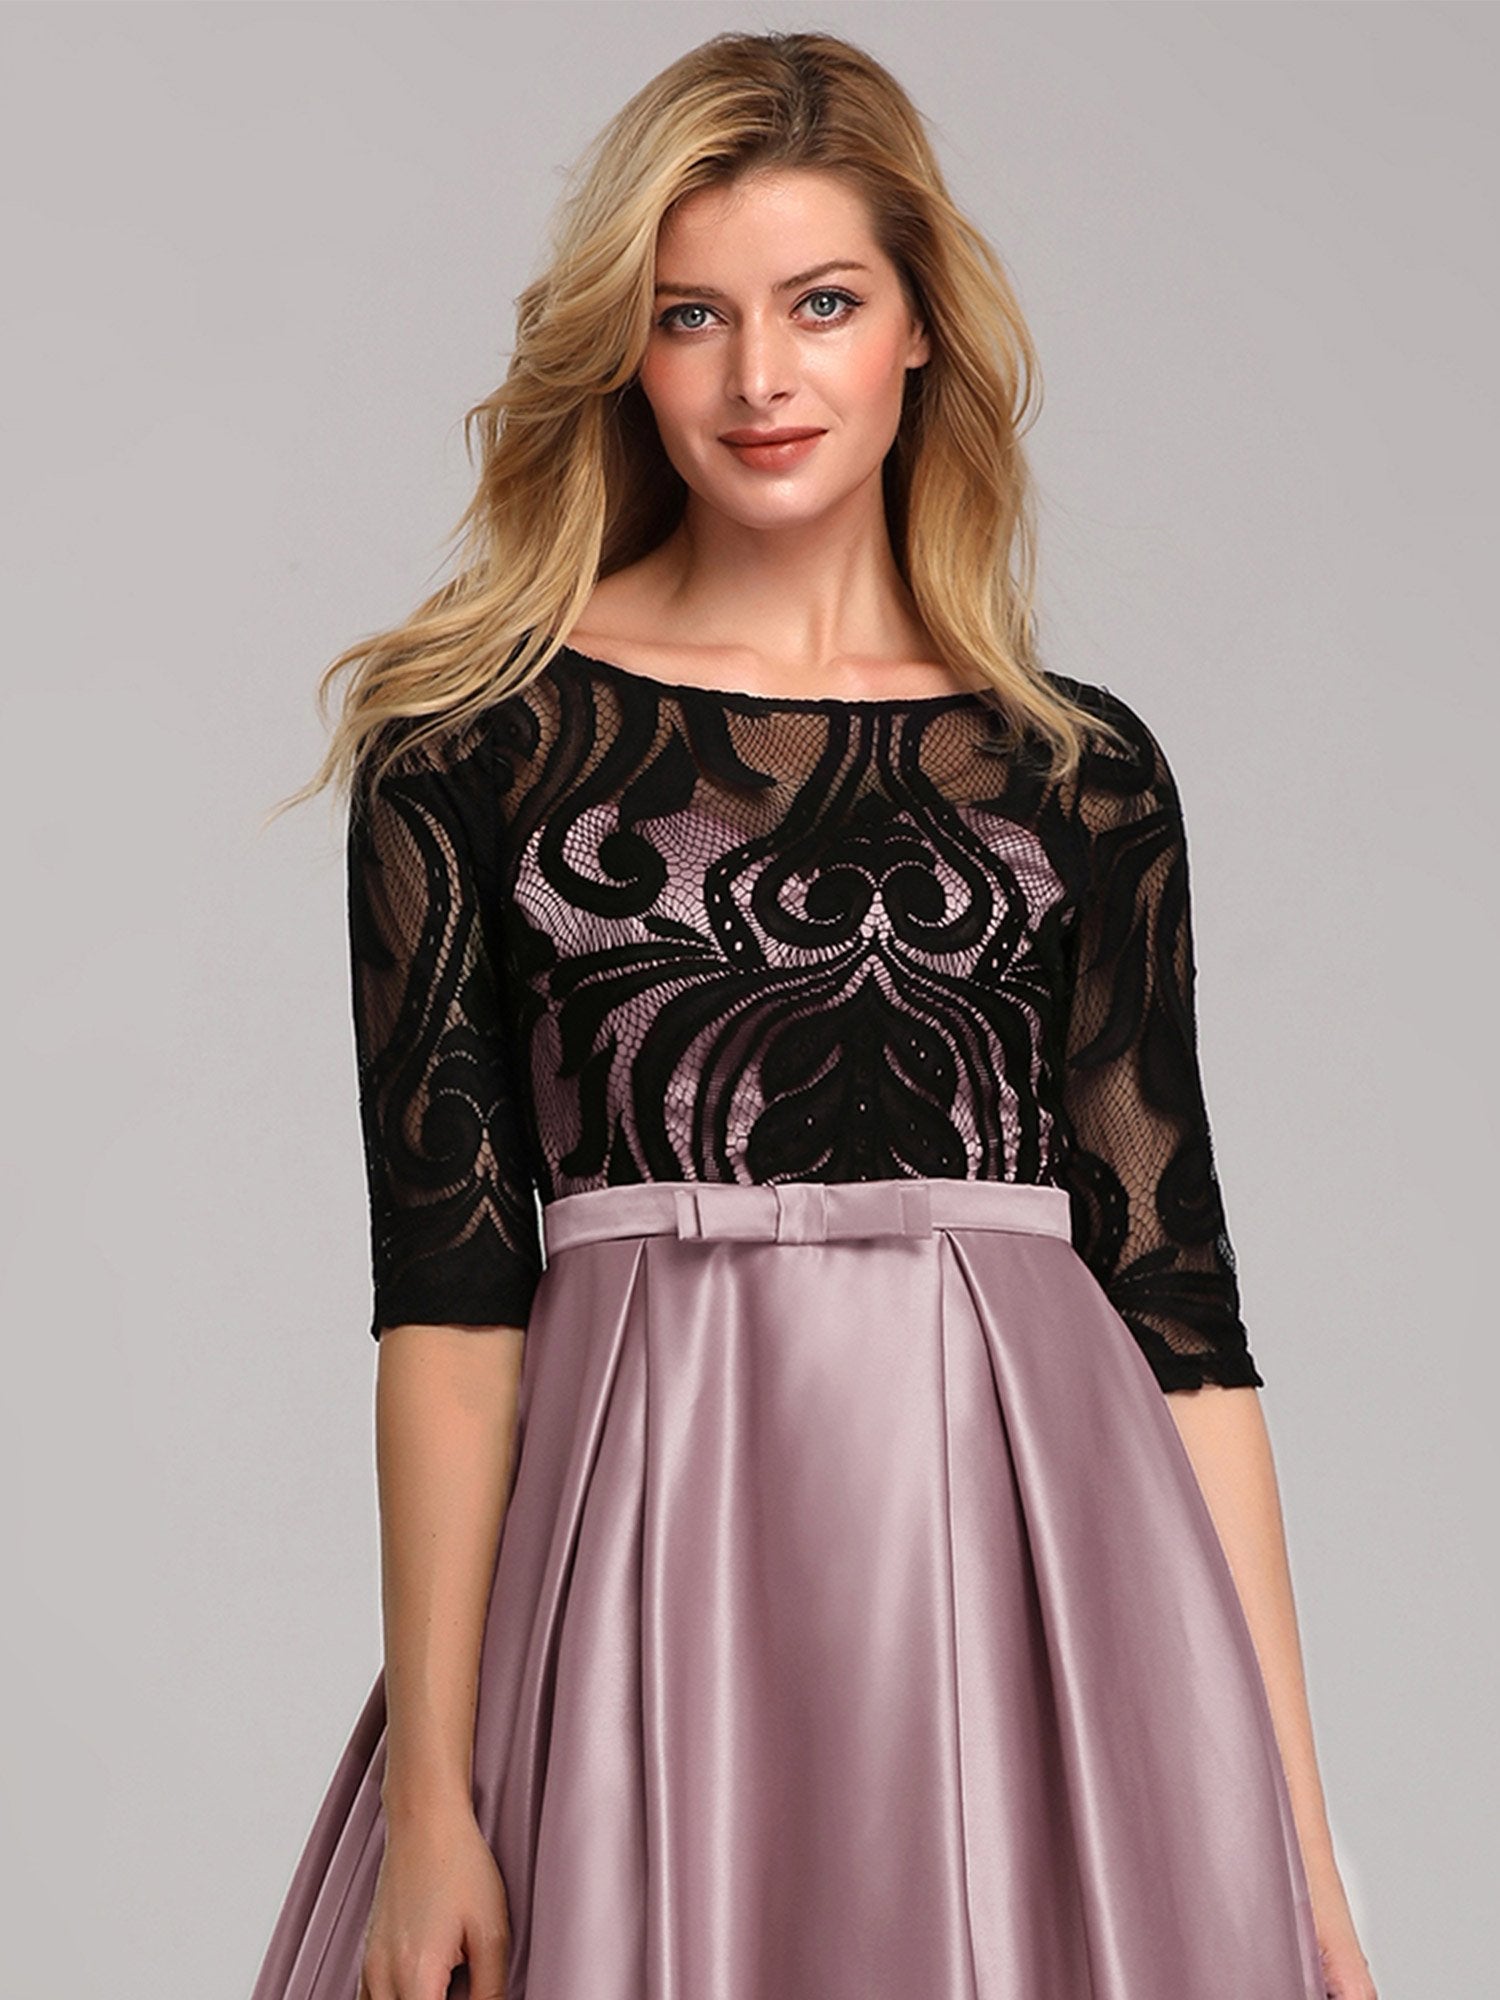 Women's Pricess Dress Lace Round Neck Formal Half Sleeves A Line Evening Dress with Bow